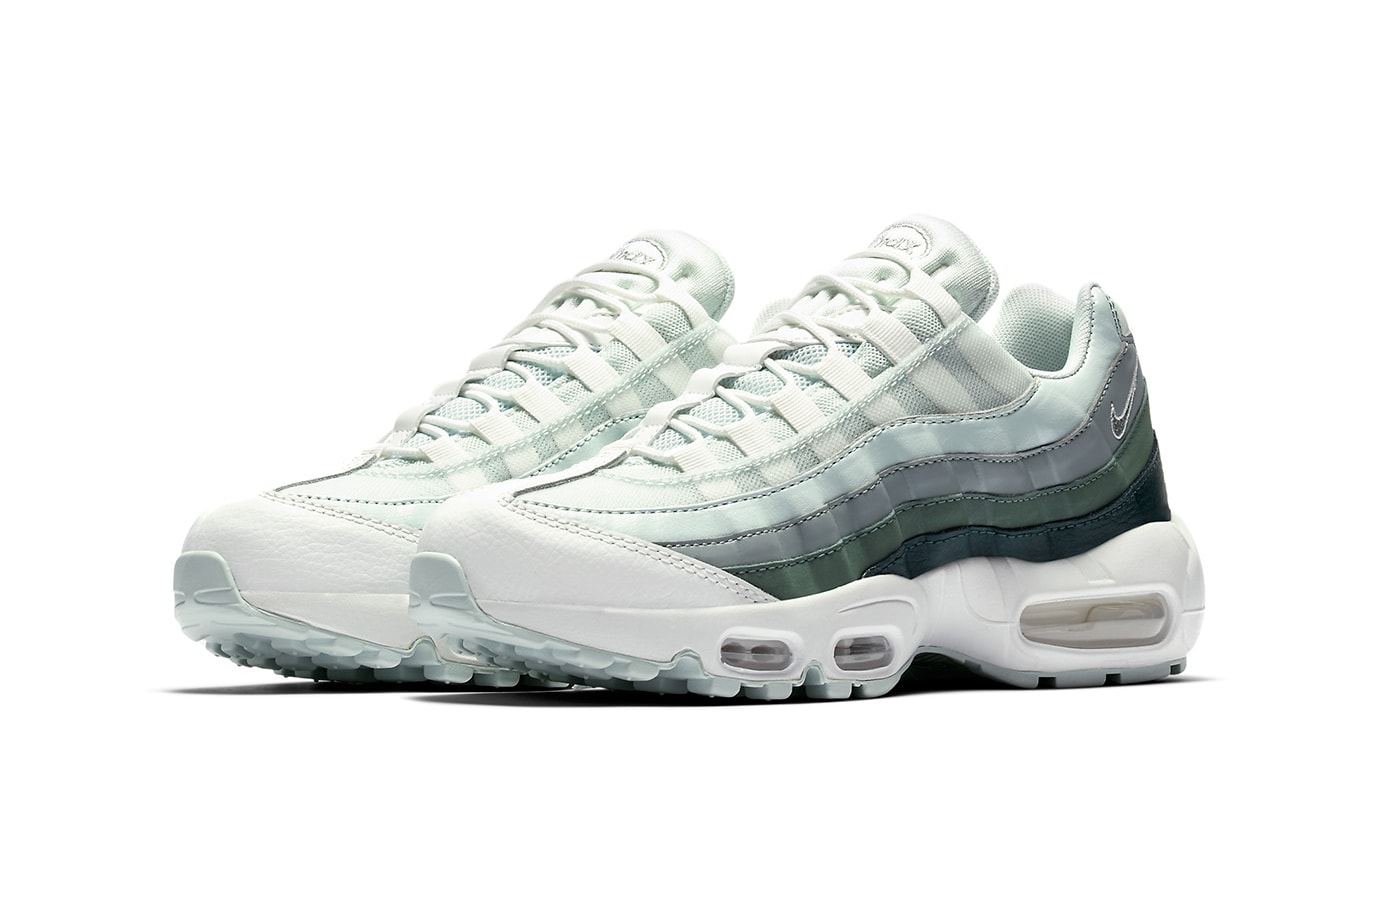 Nike Air Max 95 Green Gradient Light Dark Ombre Mint mens women's unisex sneakers trainers release info where to buy